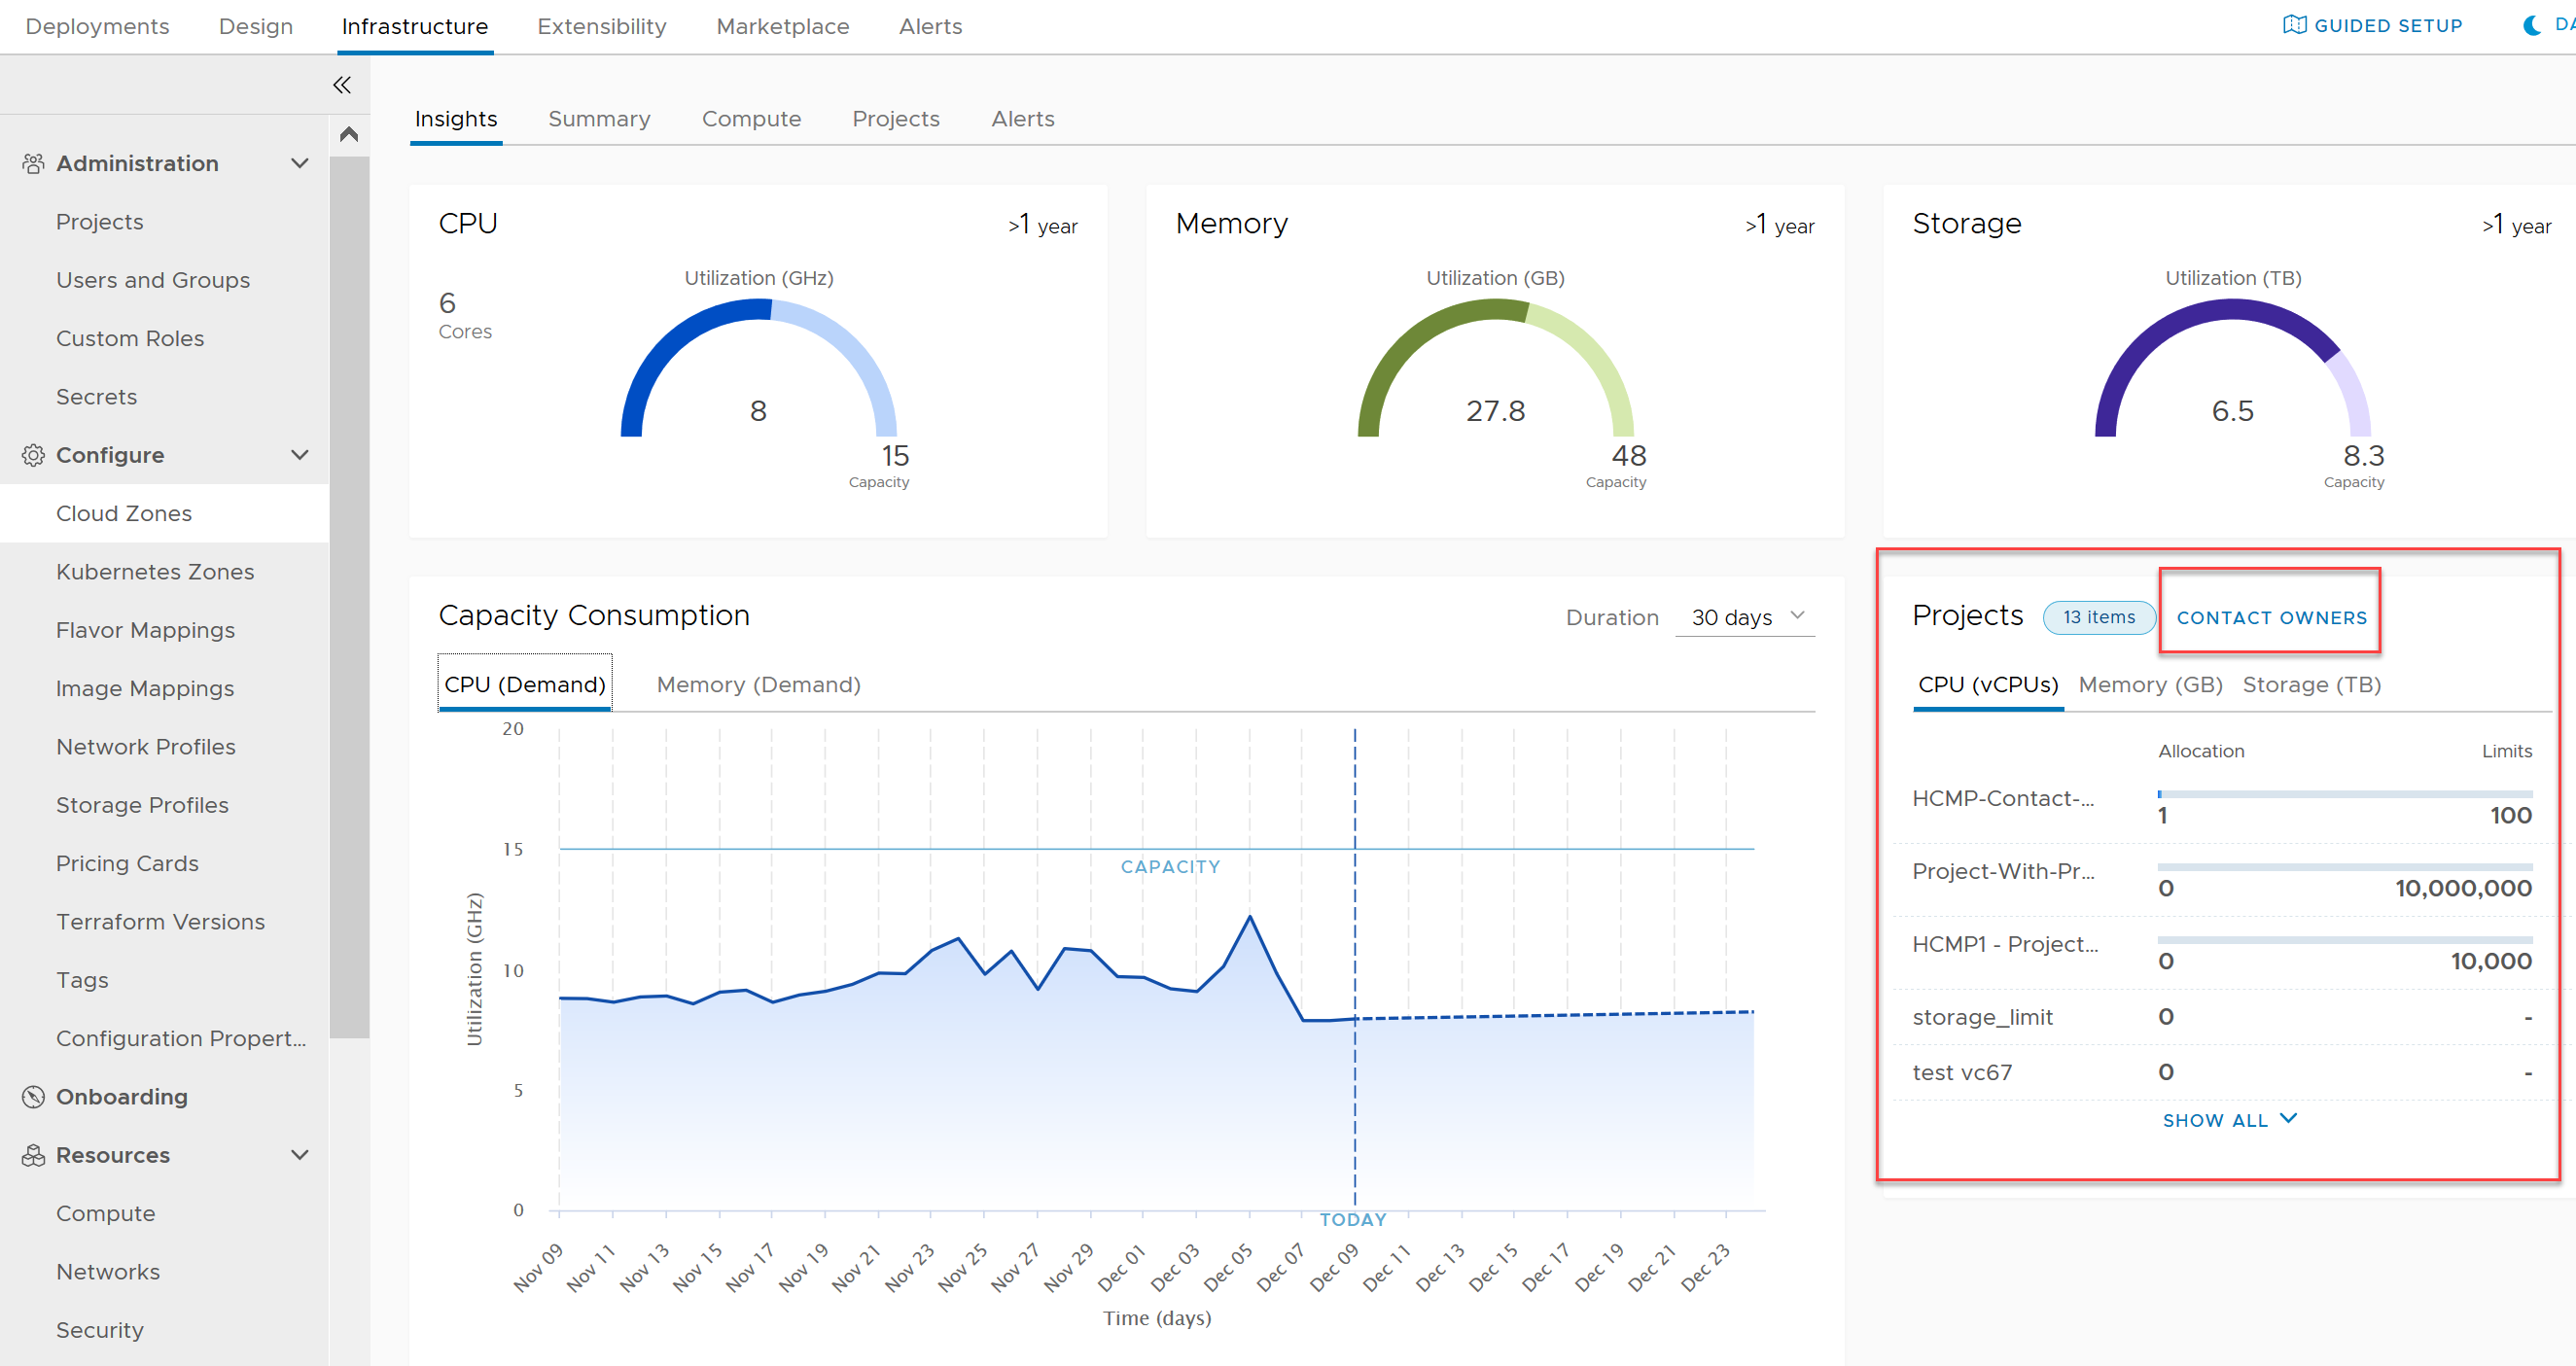 sample insights dashboard with Contact owners highlighted